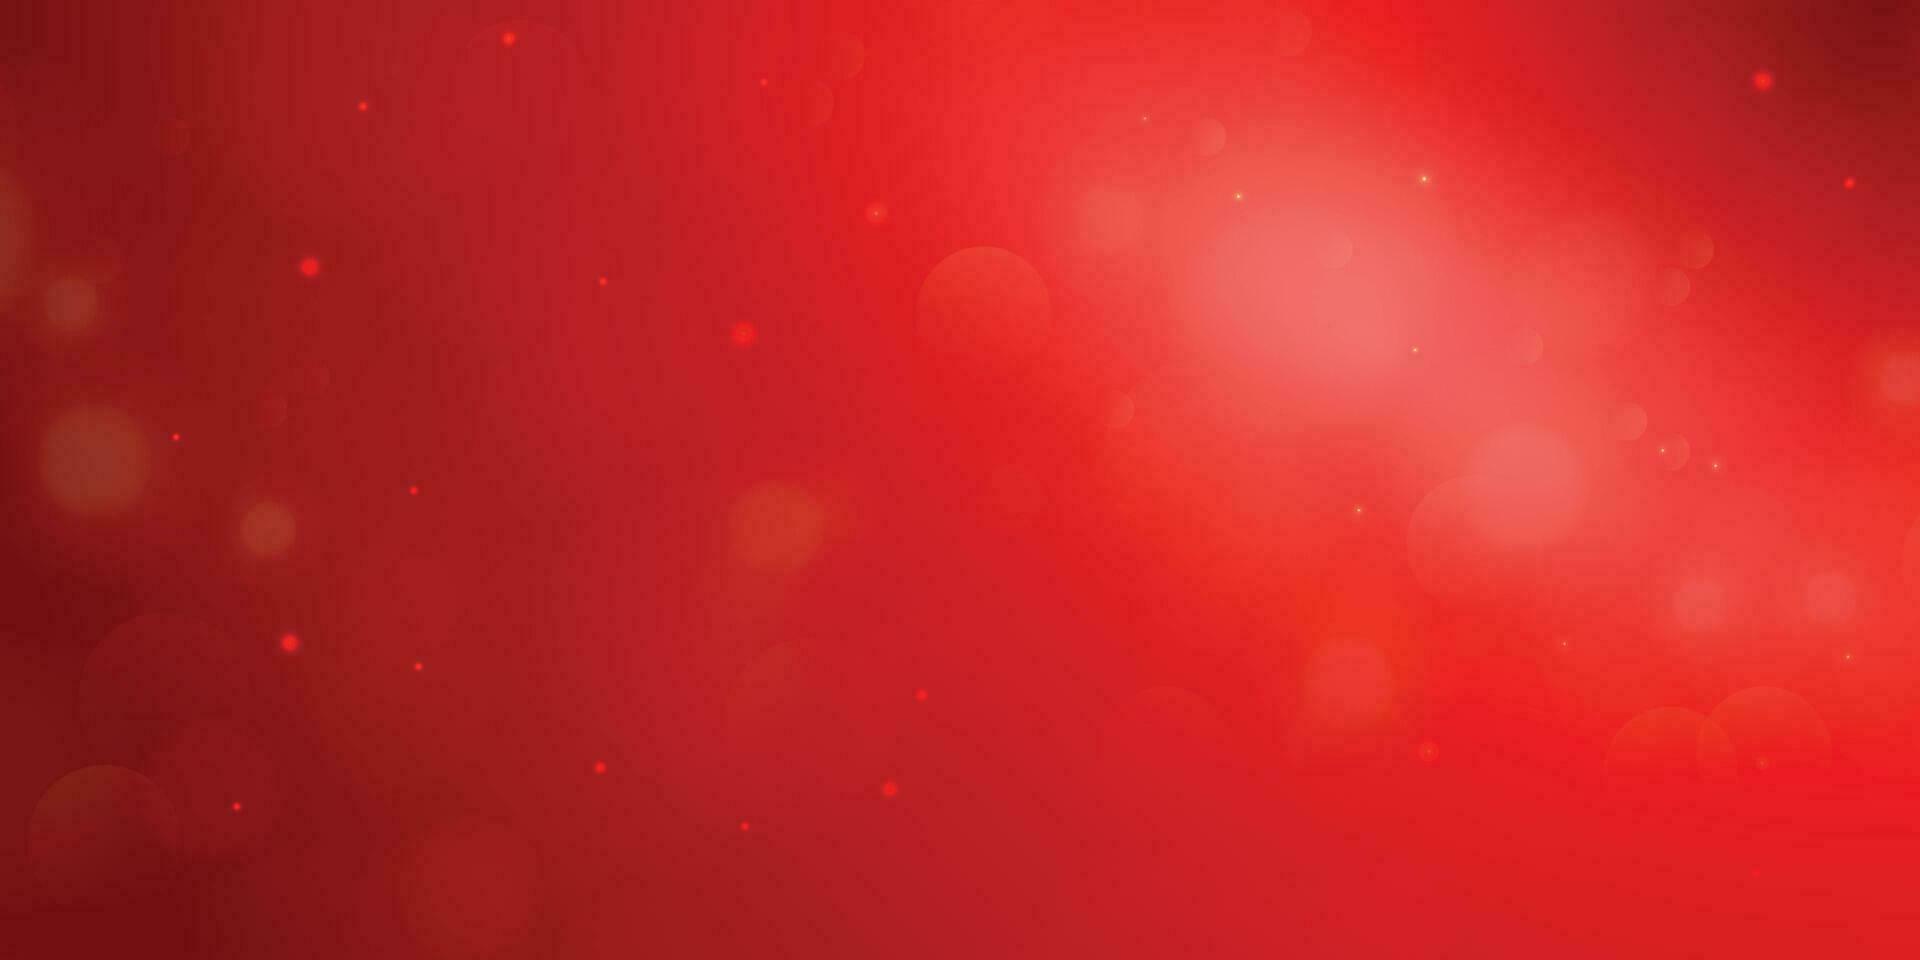 Gradient Red Background With Bokeh Effect vector